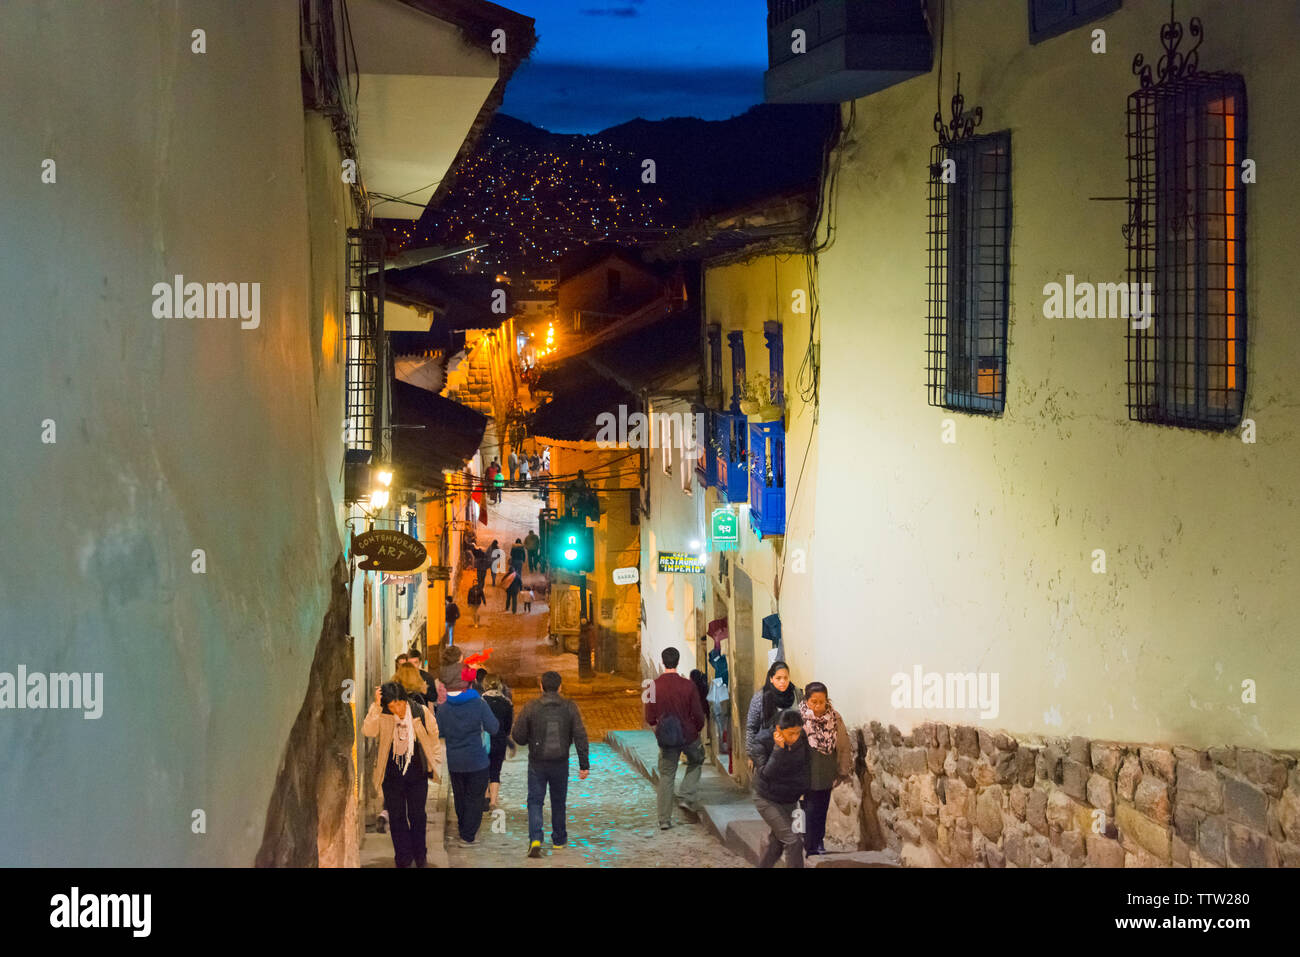 People walking on cobblestone street lined up with colonial houses at night, Cusco, Peru Stock Photo